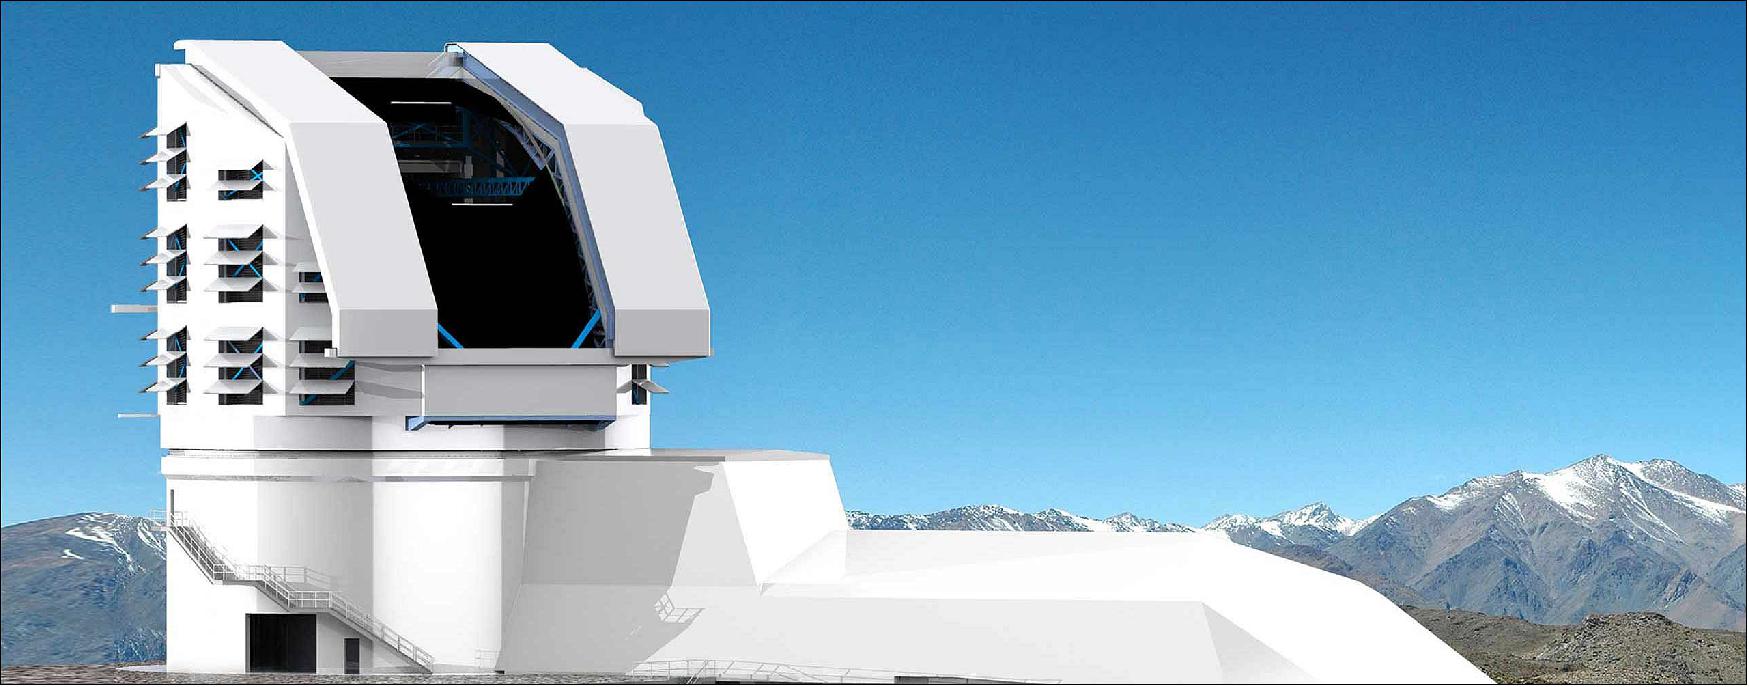 Figure 6: A photograph and rendering mix of the exterior of the Vera C. Rubin Observatory building on Cerro Pachón in Chile (image credit: LSST/NSF/AURA)